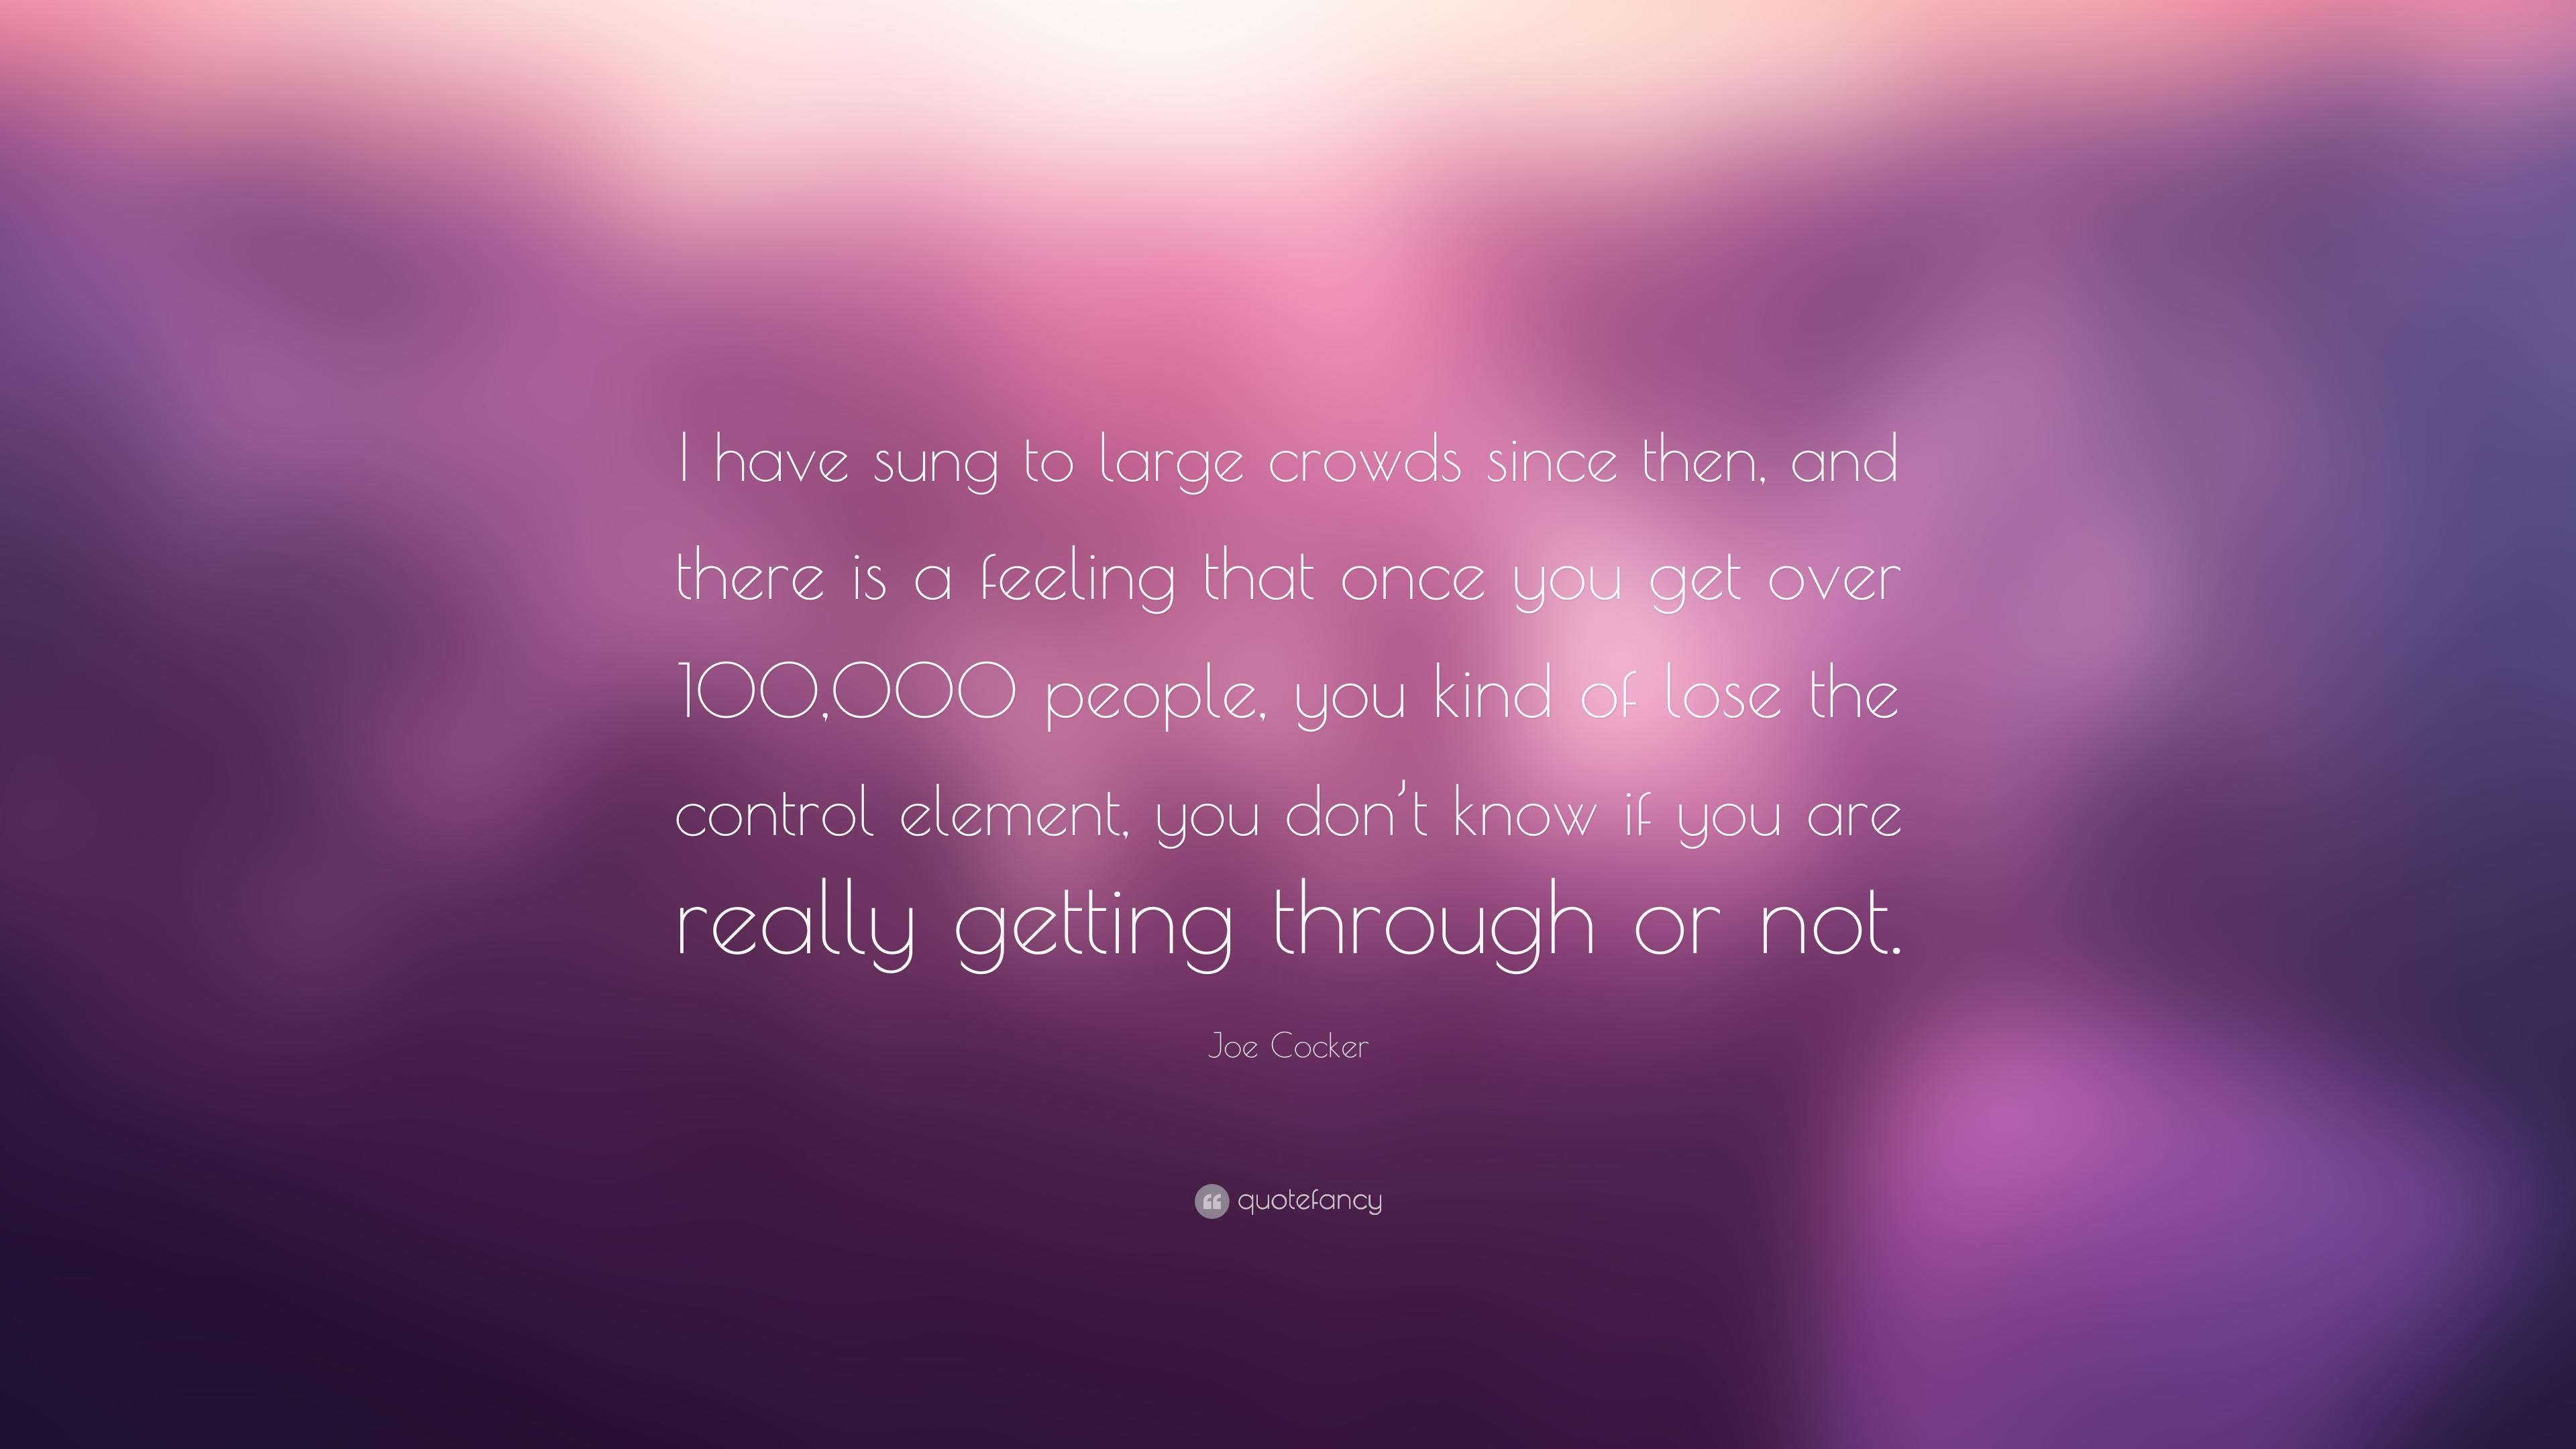 Joe Cocker Quote: “I have sung to large crowds since then, and there